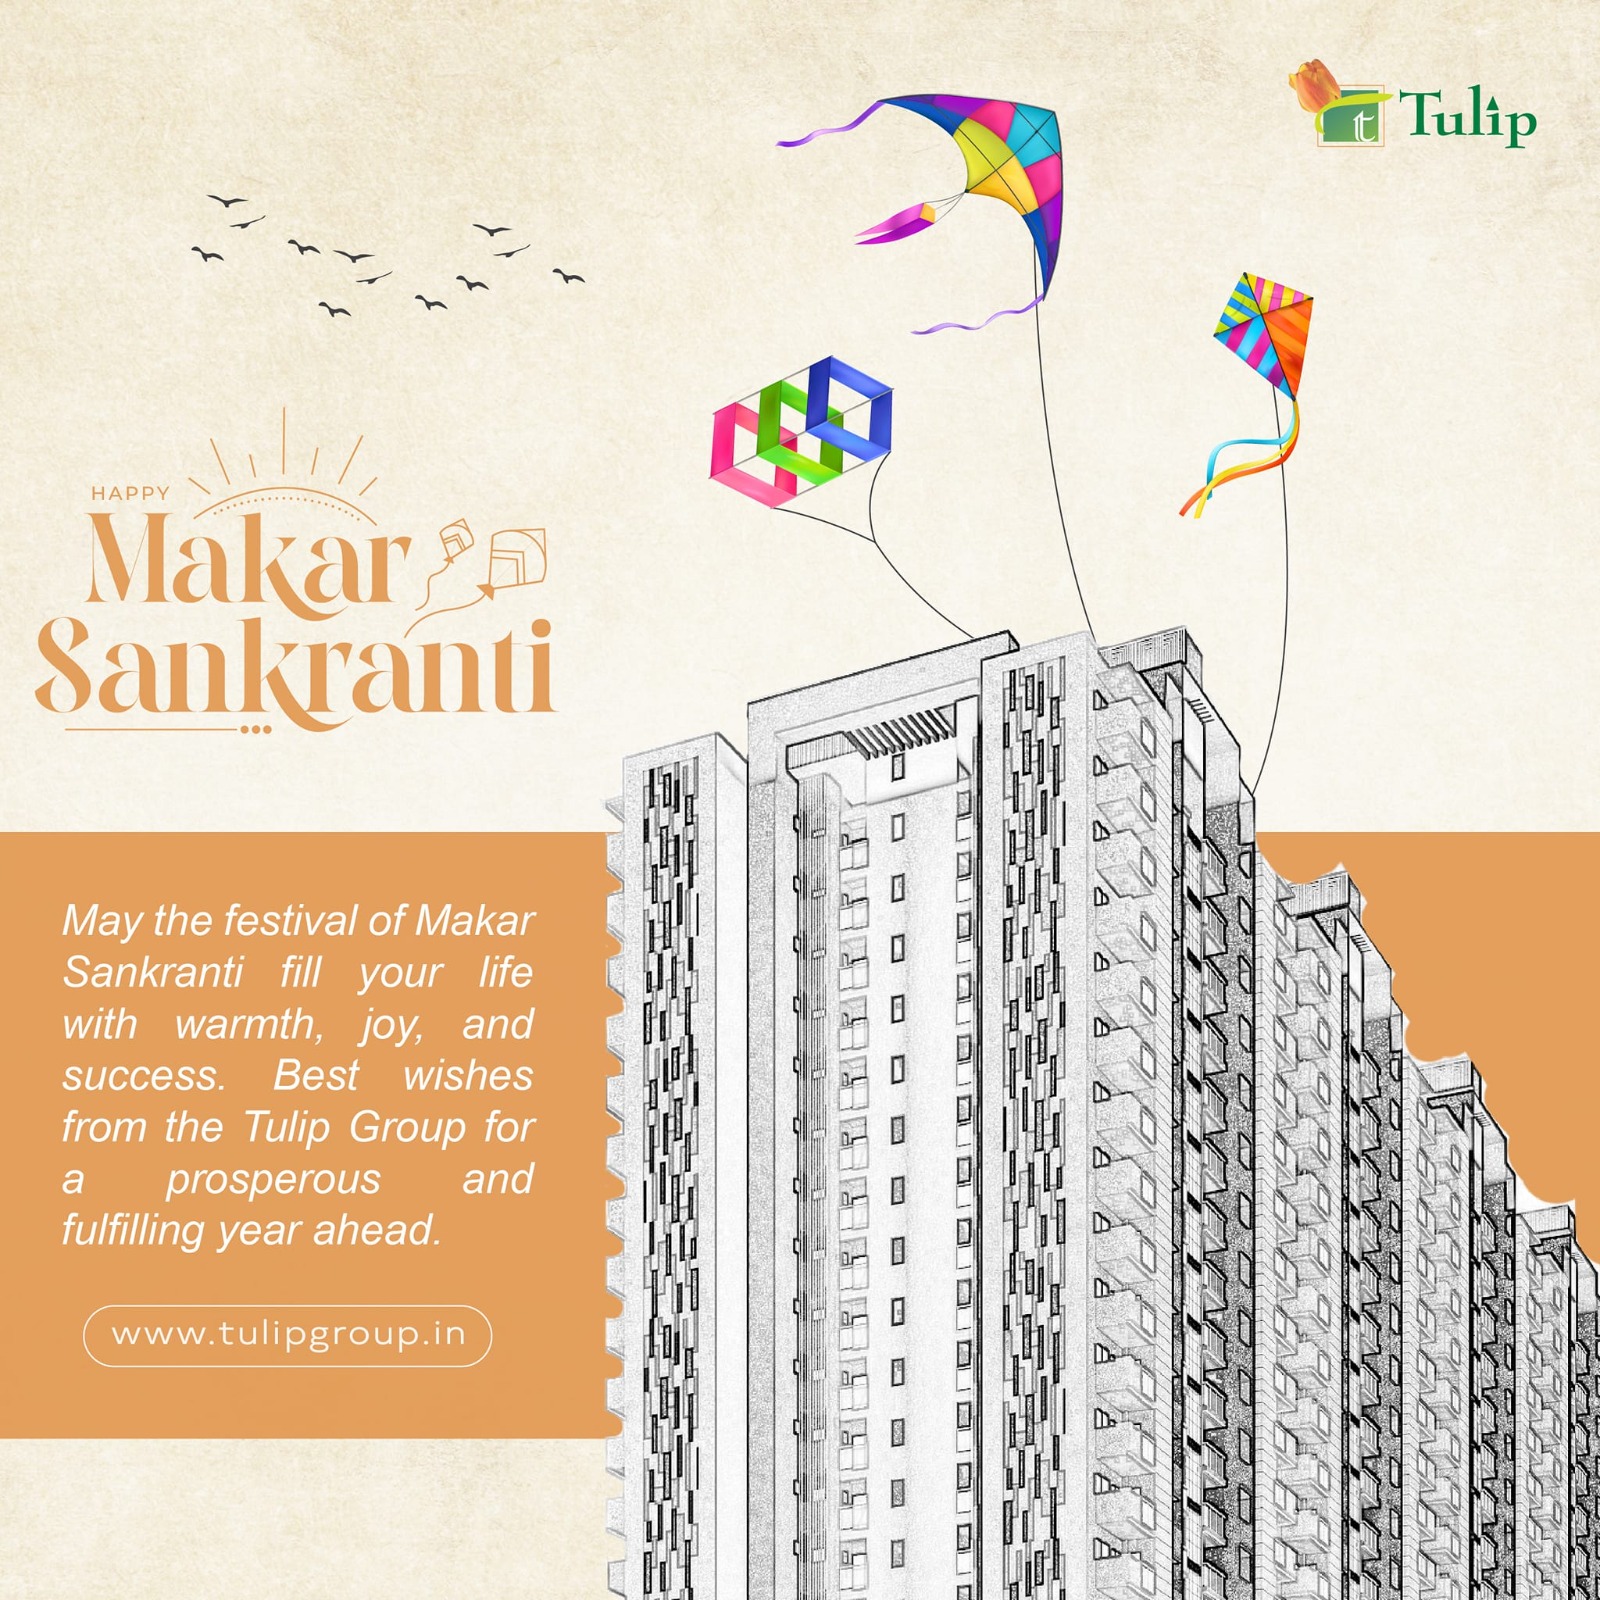 Tulip Group Spreads Joy and Warmth this Makar Sankranti Update